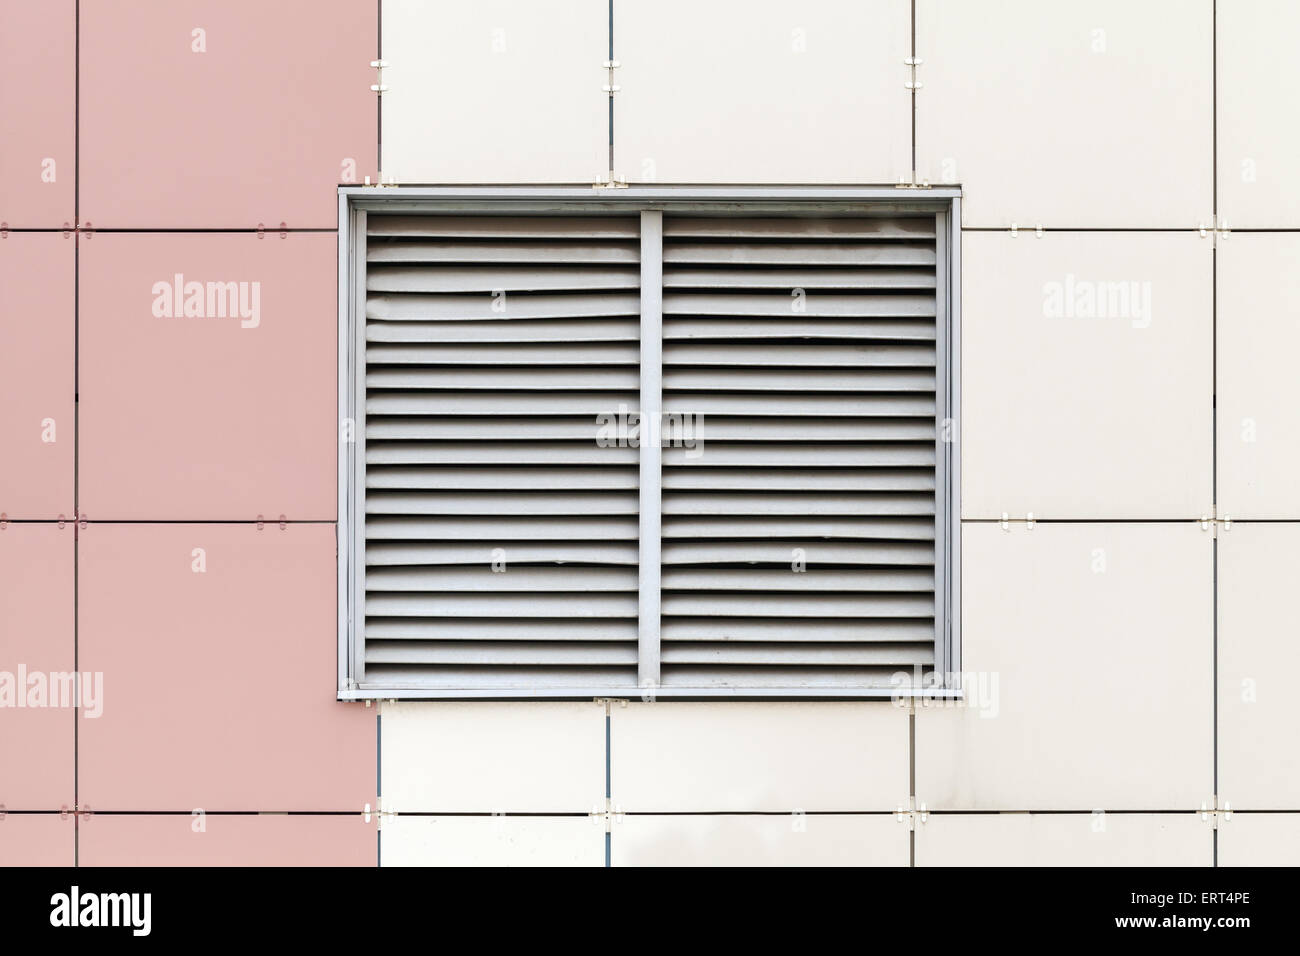 Gray ventilation grille on the window, modern industrial building facade fragment Stock Photo